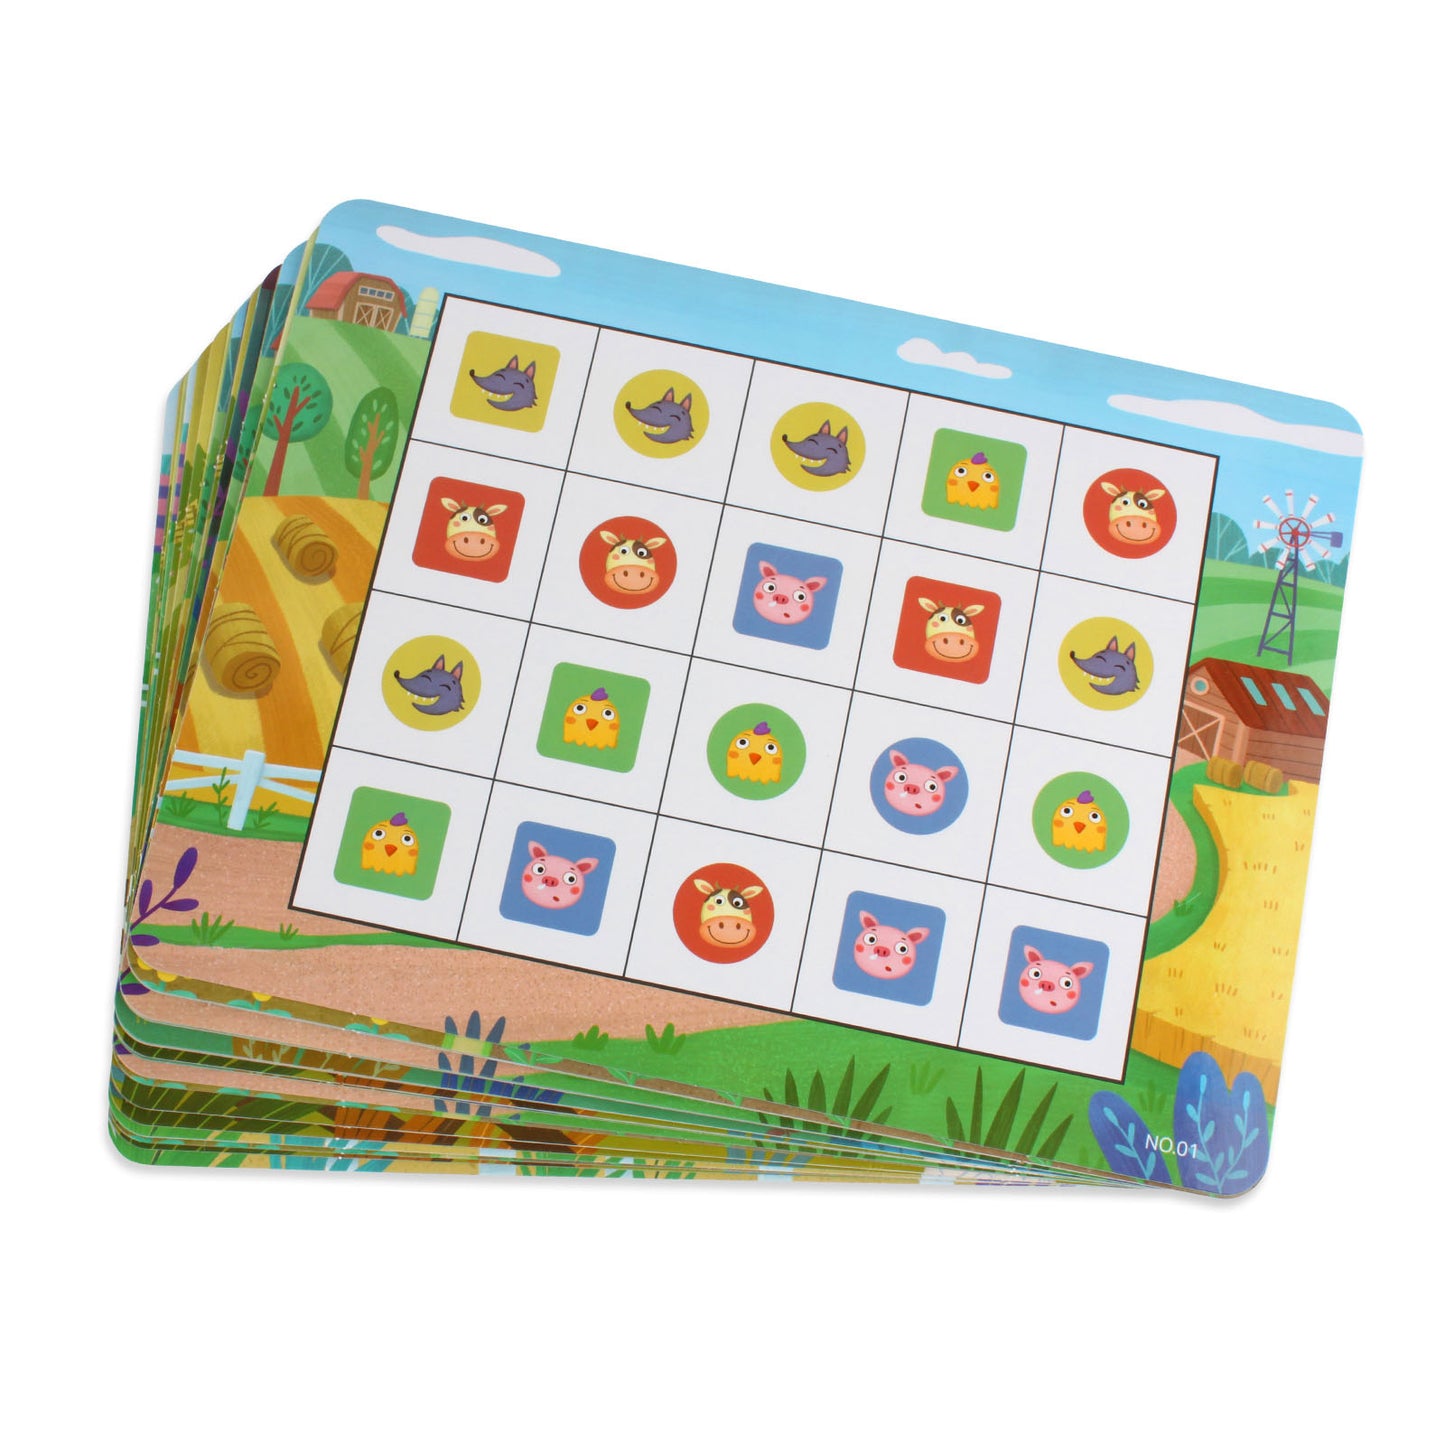 NOOLY Matching Game, Puzzle Game for Kids, PW0422 ( Happy farm)